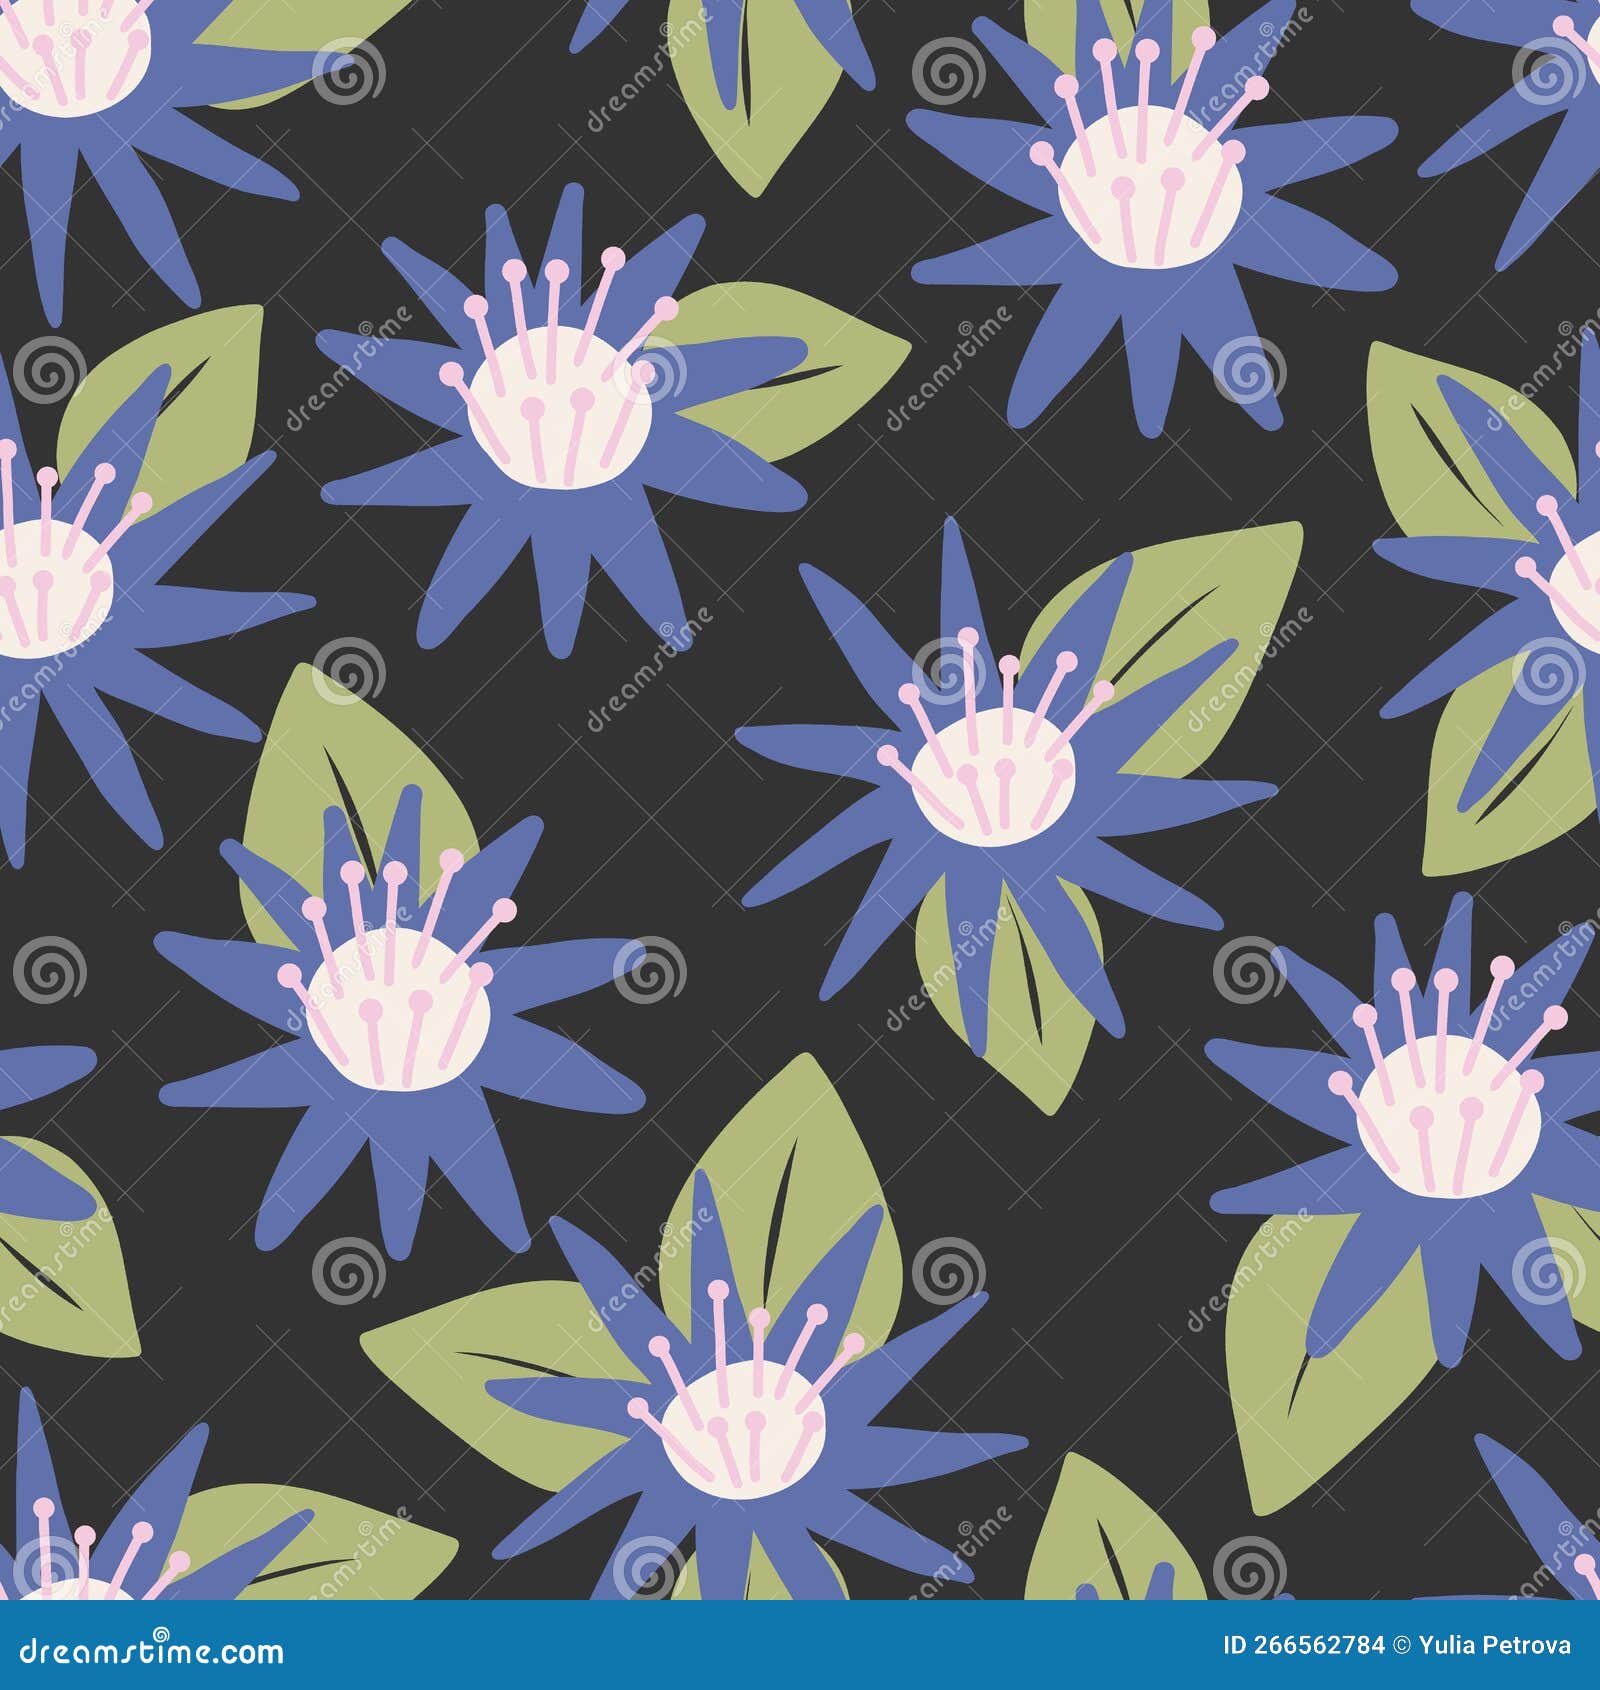 Peculiar Flowers Seamless Pattern Stock Vector - Illustration of